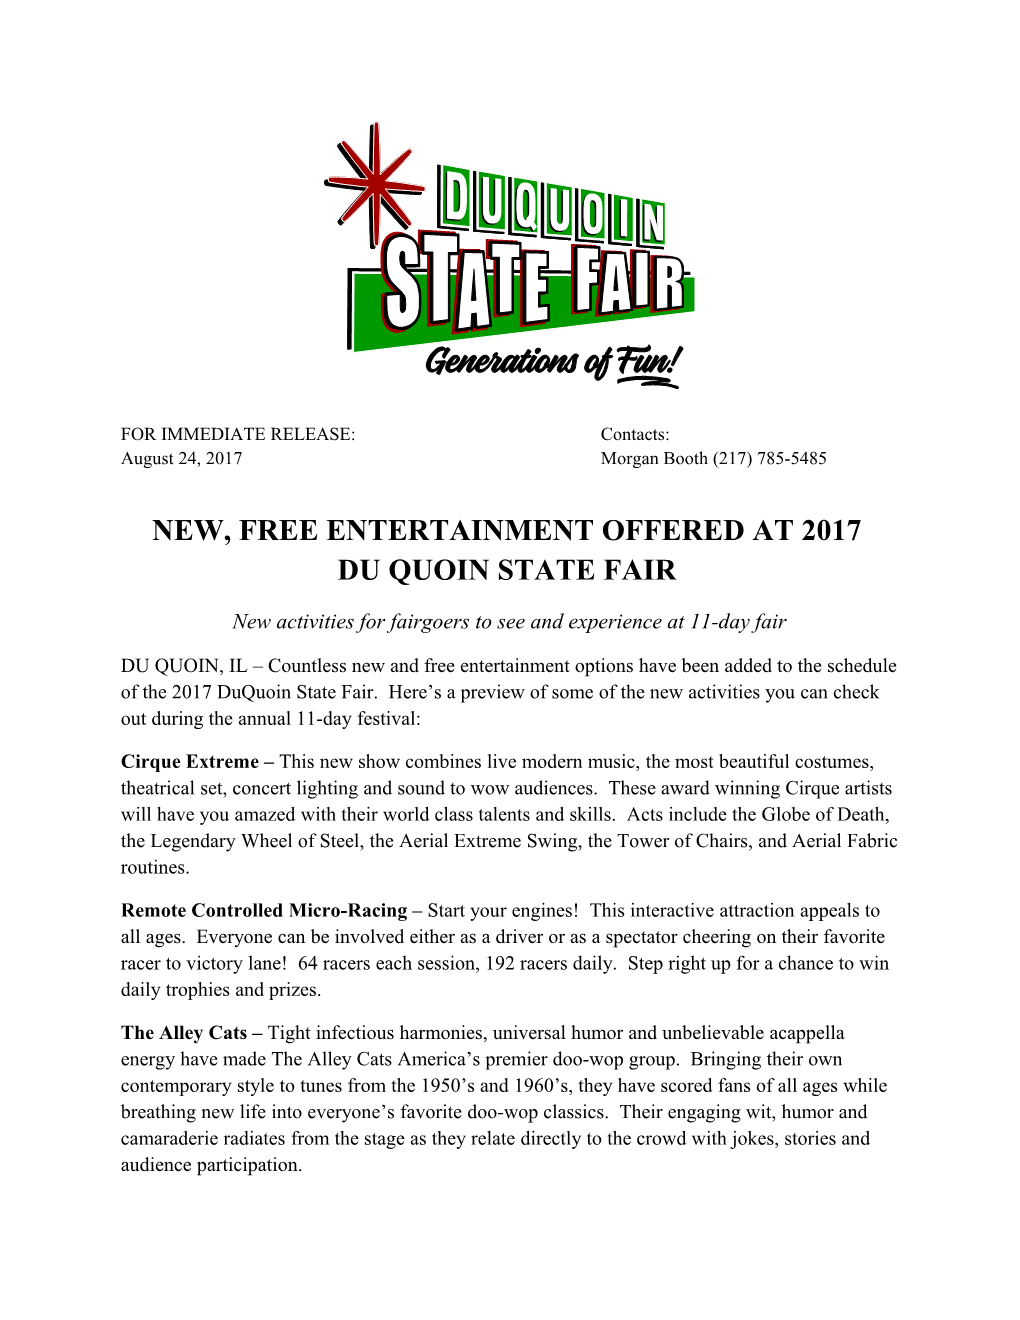 New, Free Entertainment Offered at 2017 Du Quoin State Fair